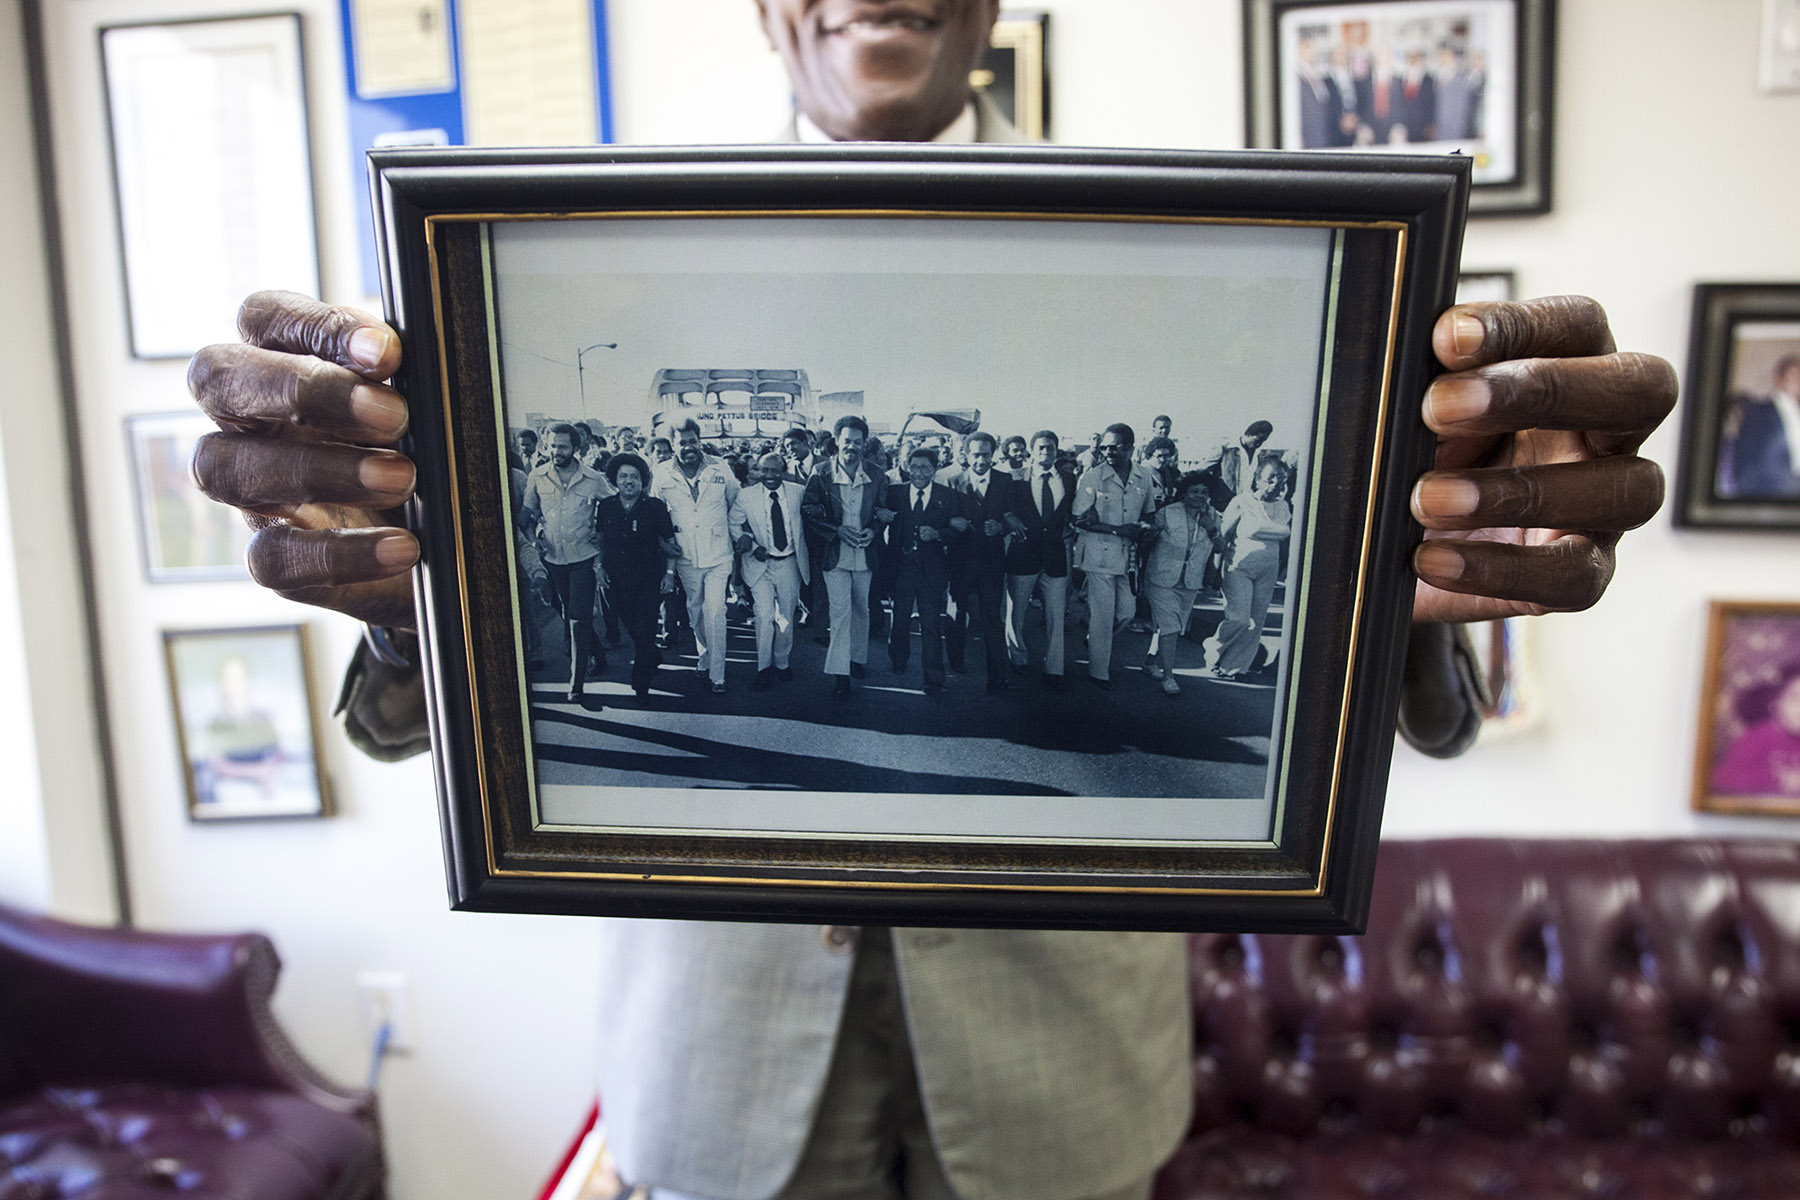 Ford holds up a photo of a commemorative march on the Edmund Pettus Bridge in 2004, but says voter discrimination has not stopped. (Jeffrey Pierre/News21)